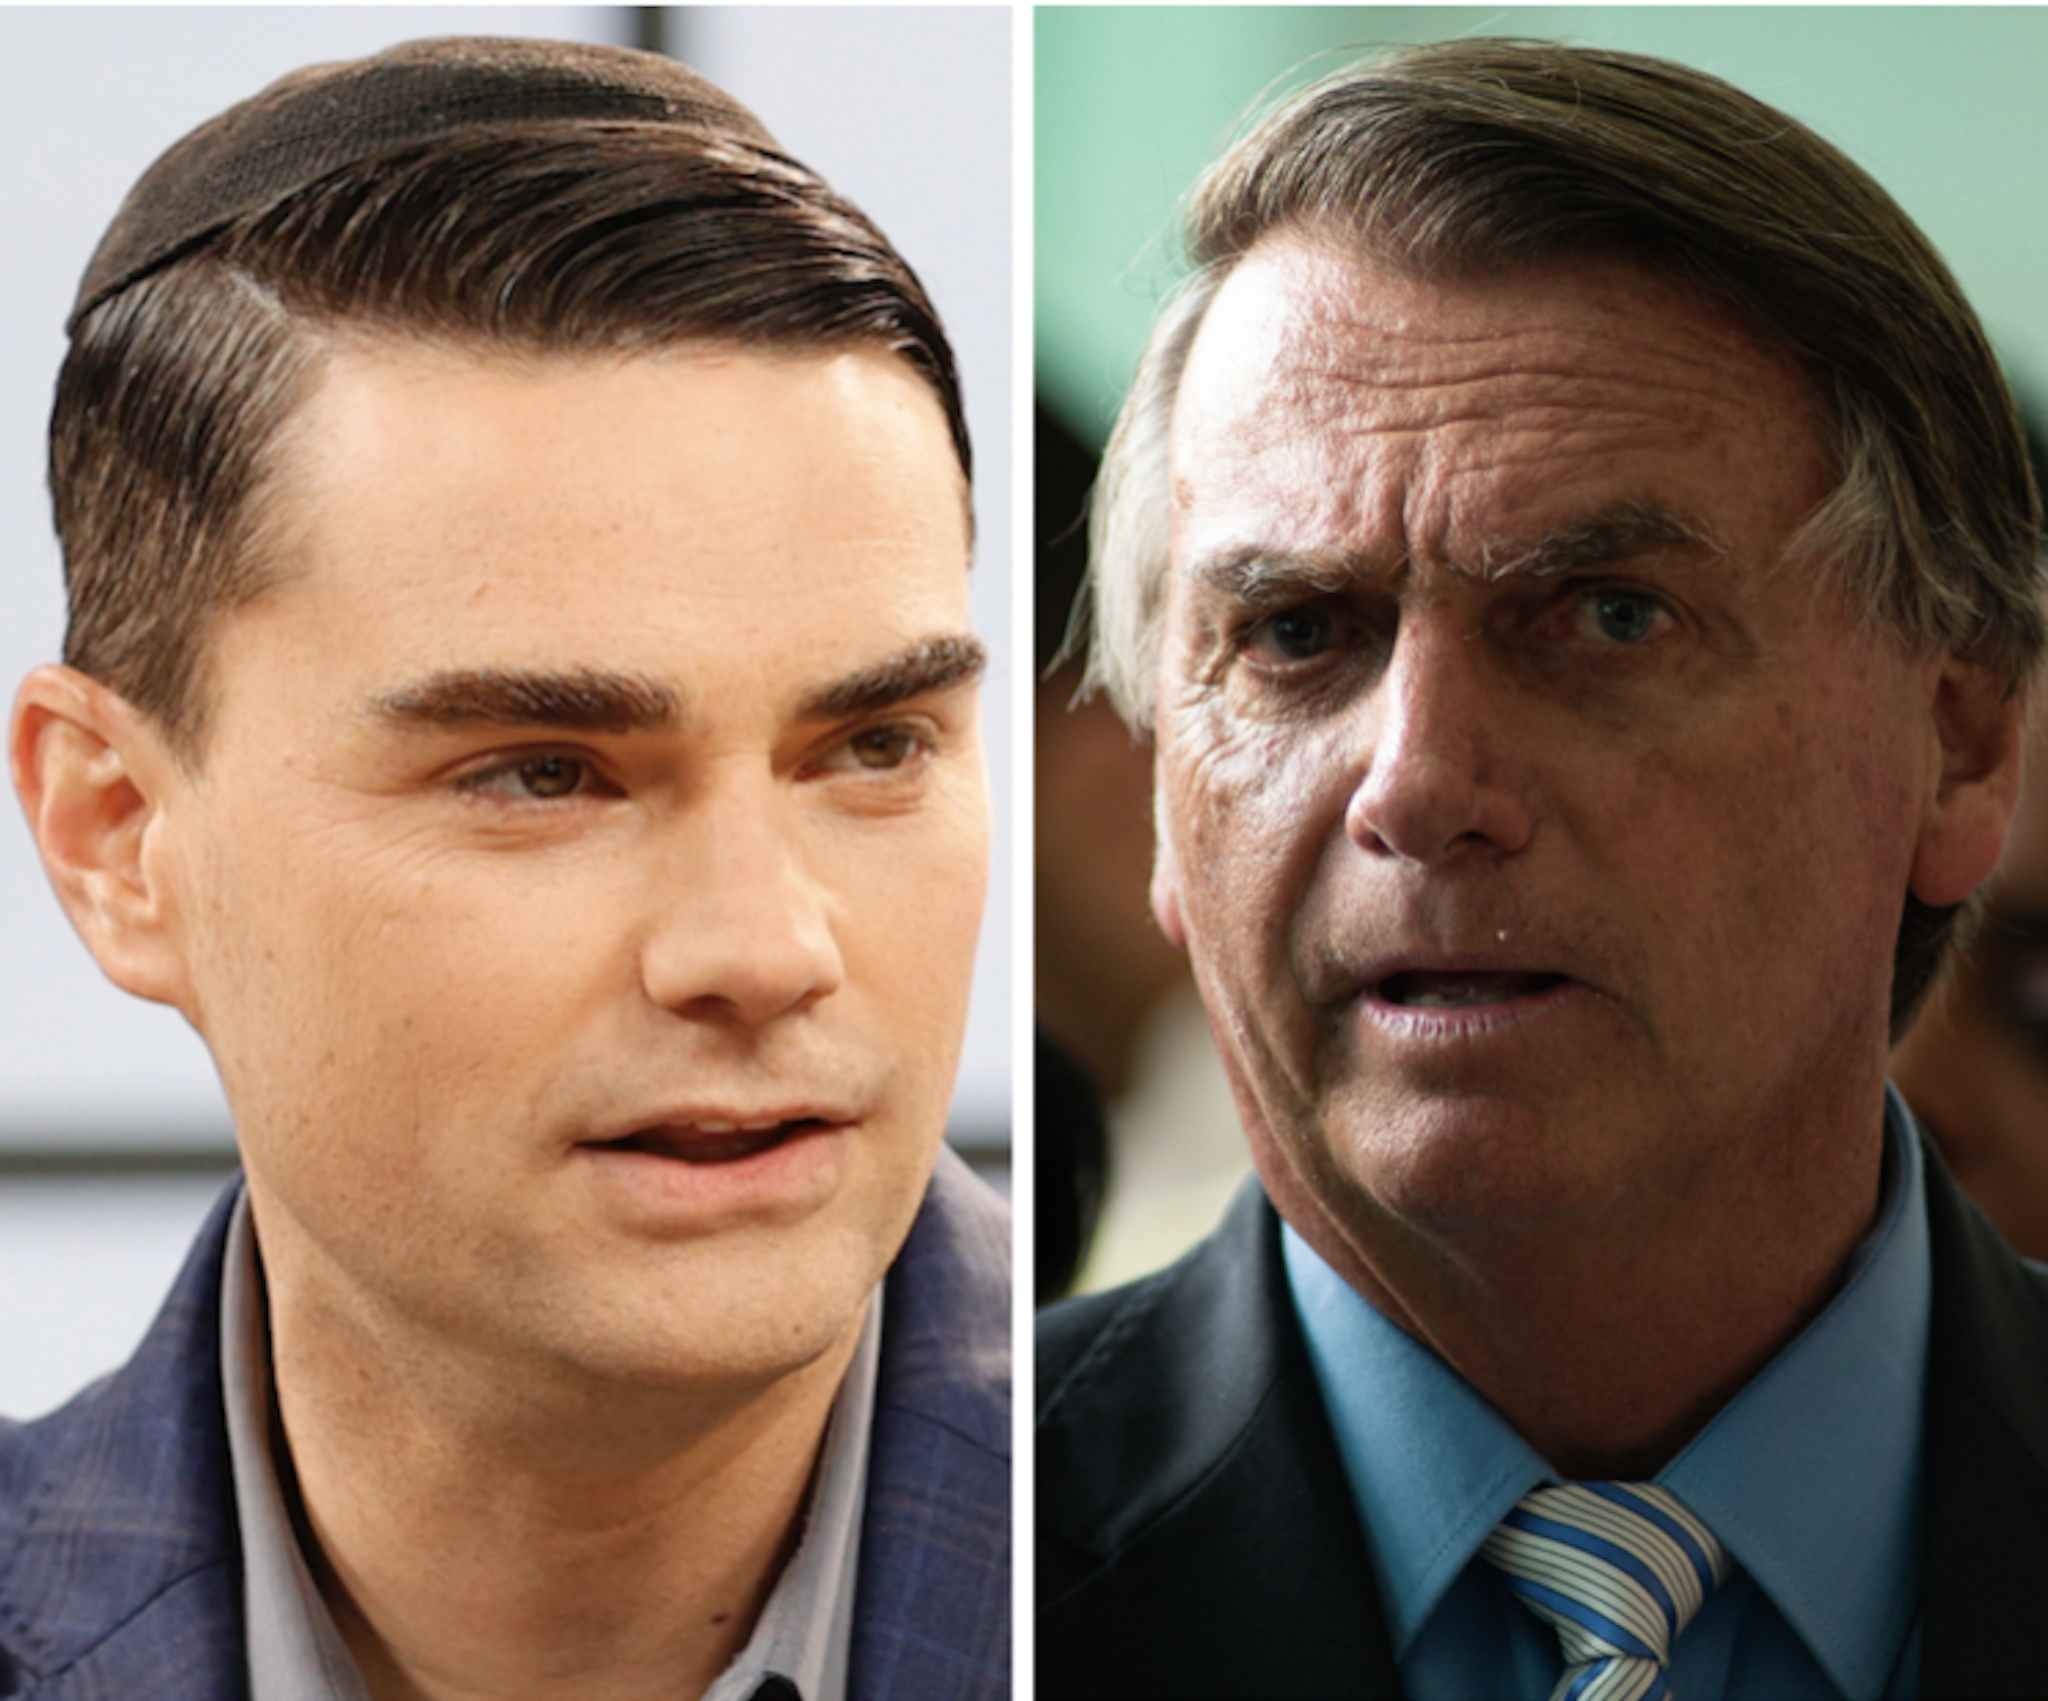 Brazilian President Jair Bolsonaro told The Daily Wire's Ben Shapiro the West can't afford to lose Brazil to corrupt socialists.